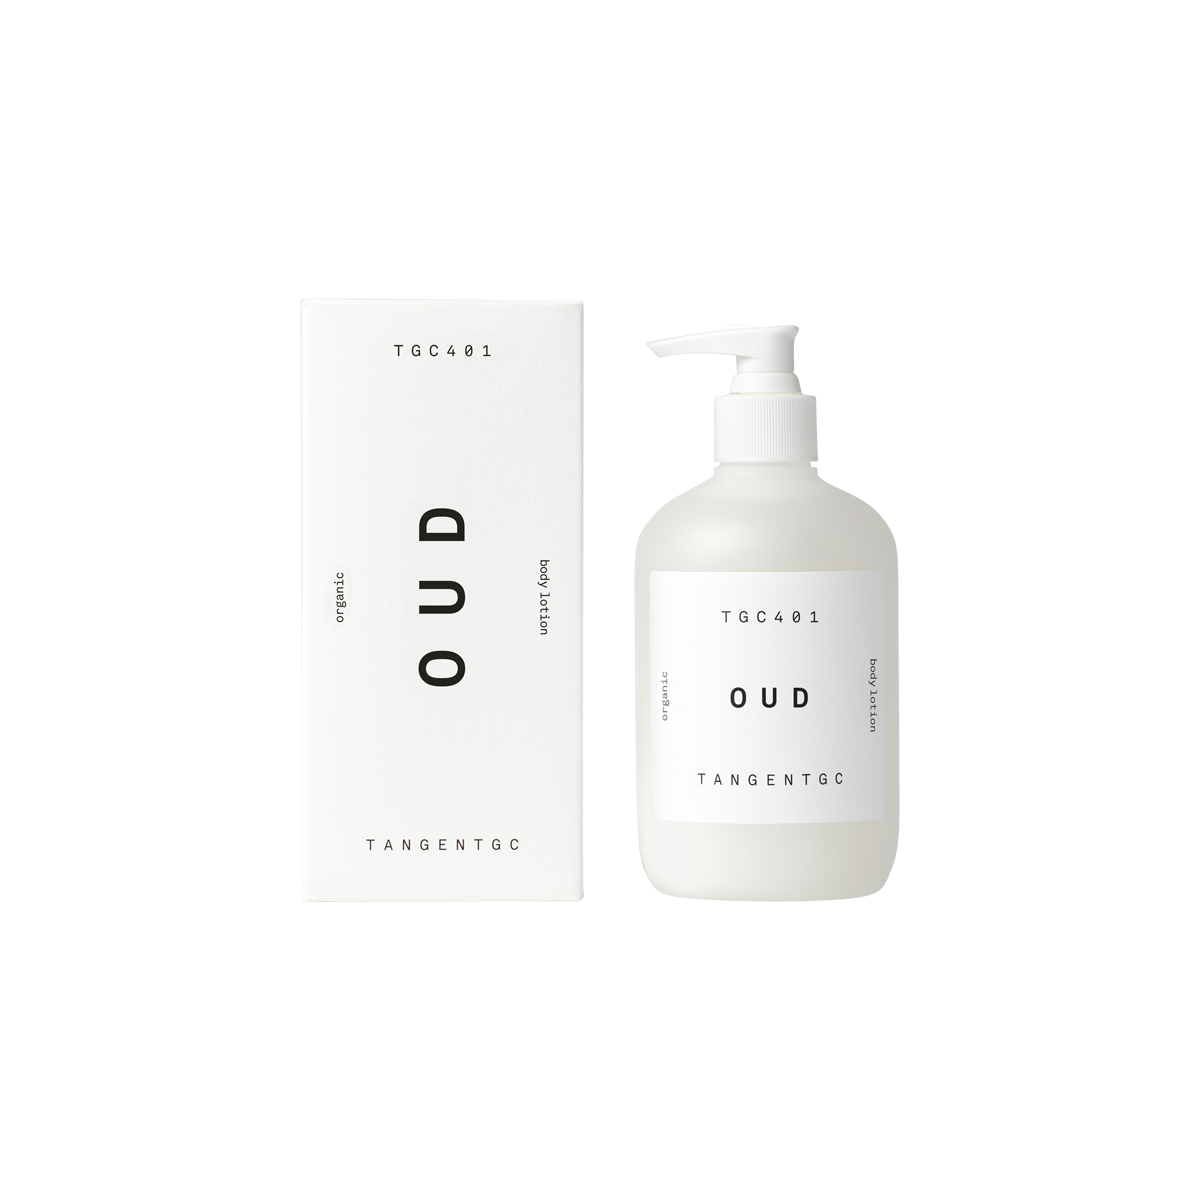 Tangent GC - Oud Body Lotion